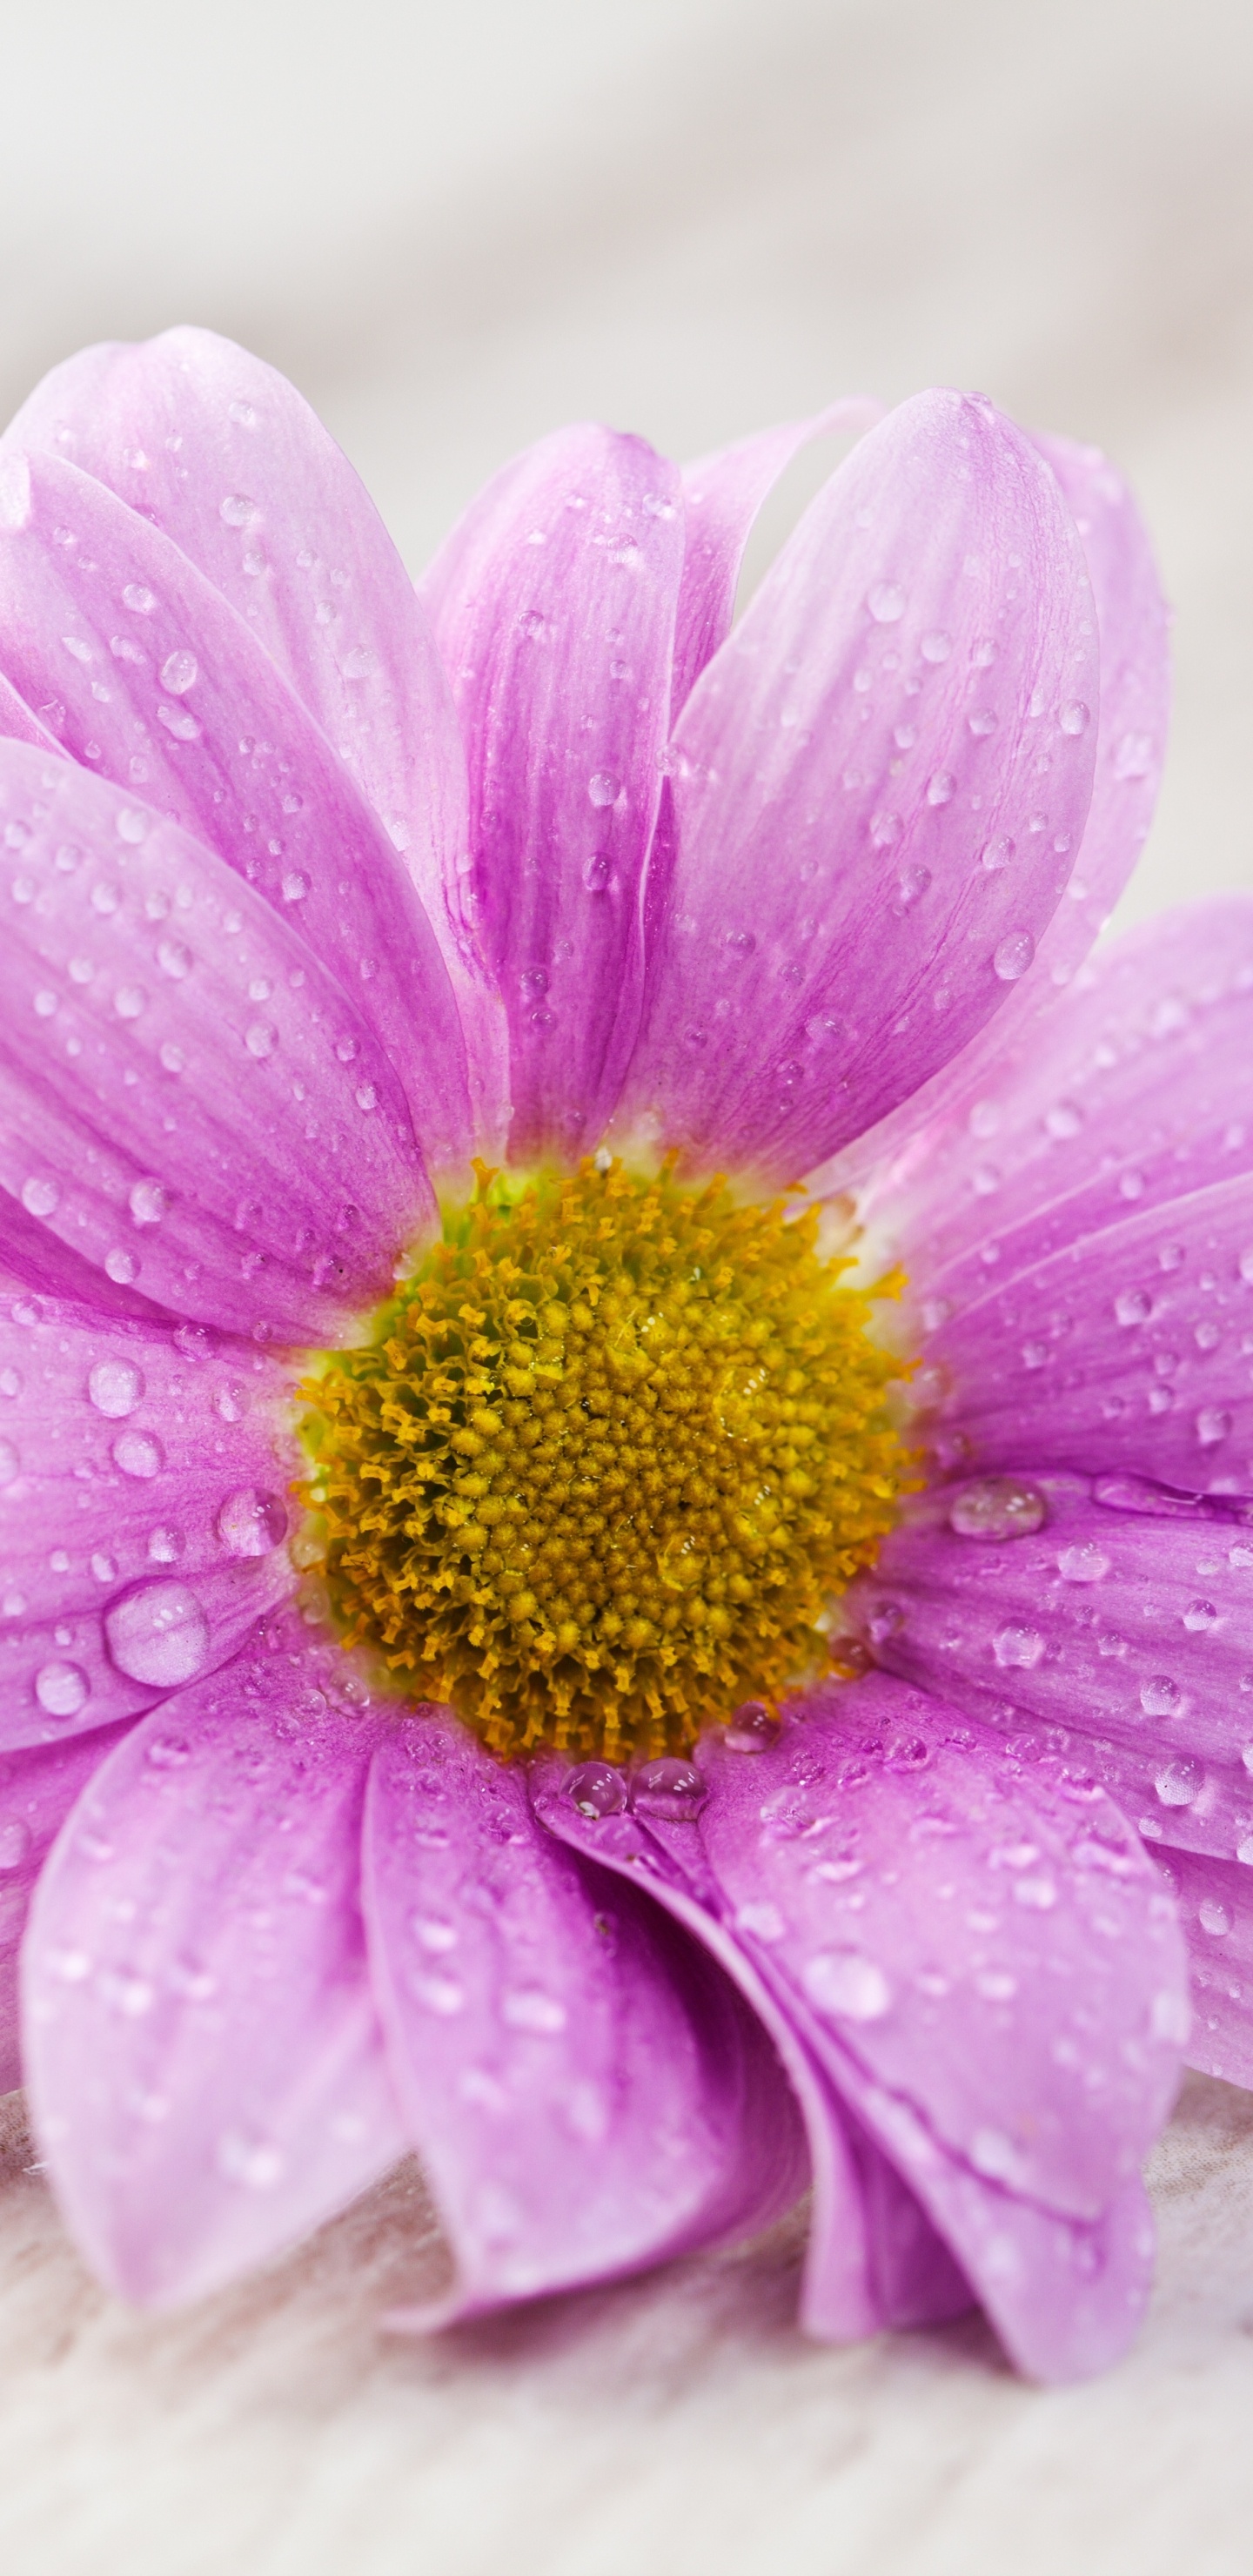 Pink Flower on White Surface. Wallpaper in 1440x2960 Resolution